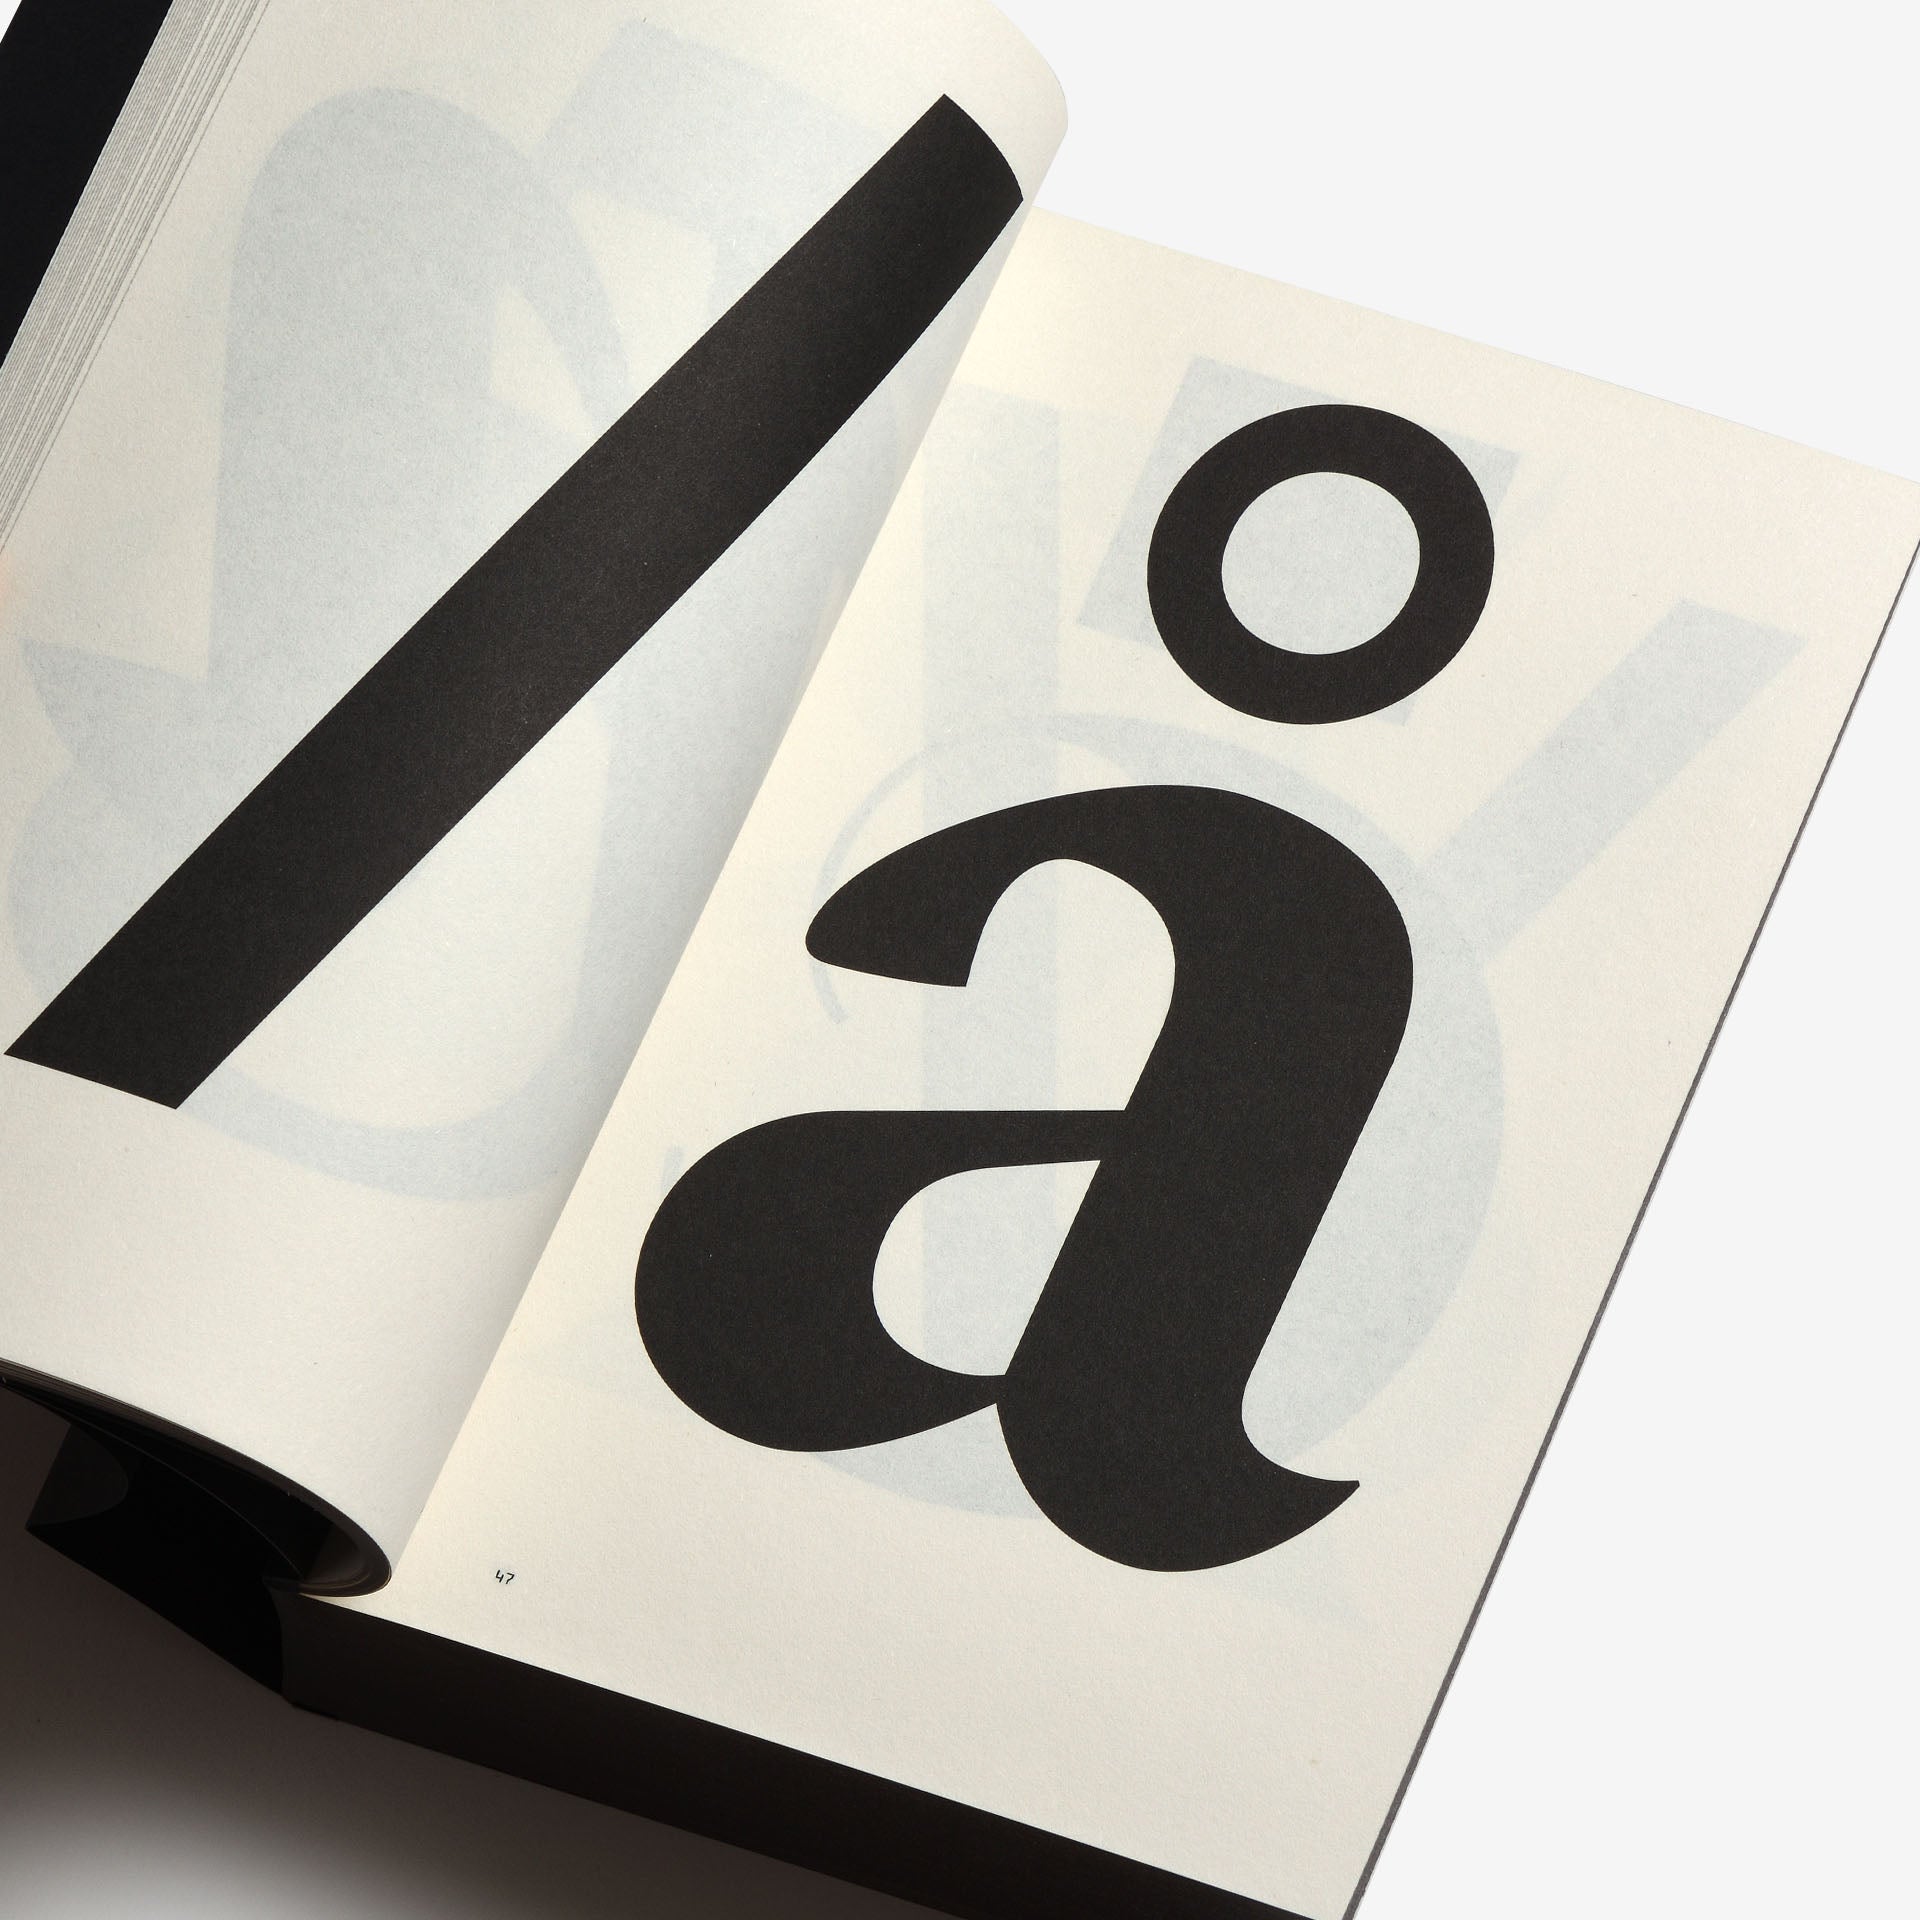 Kris Sowersby: The Art of Letters